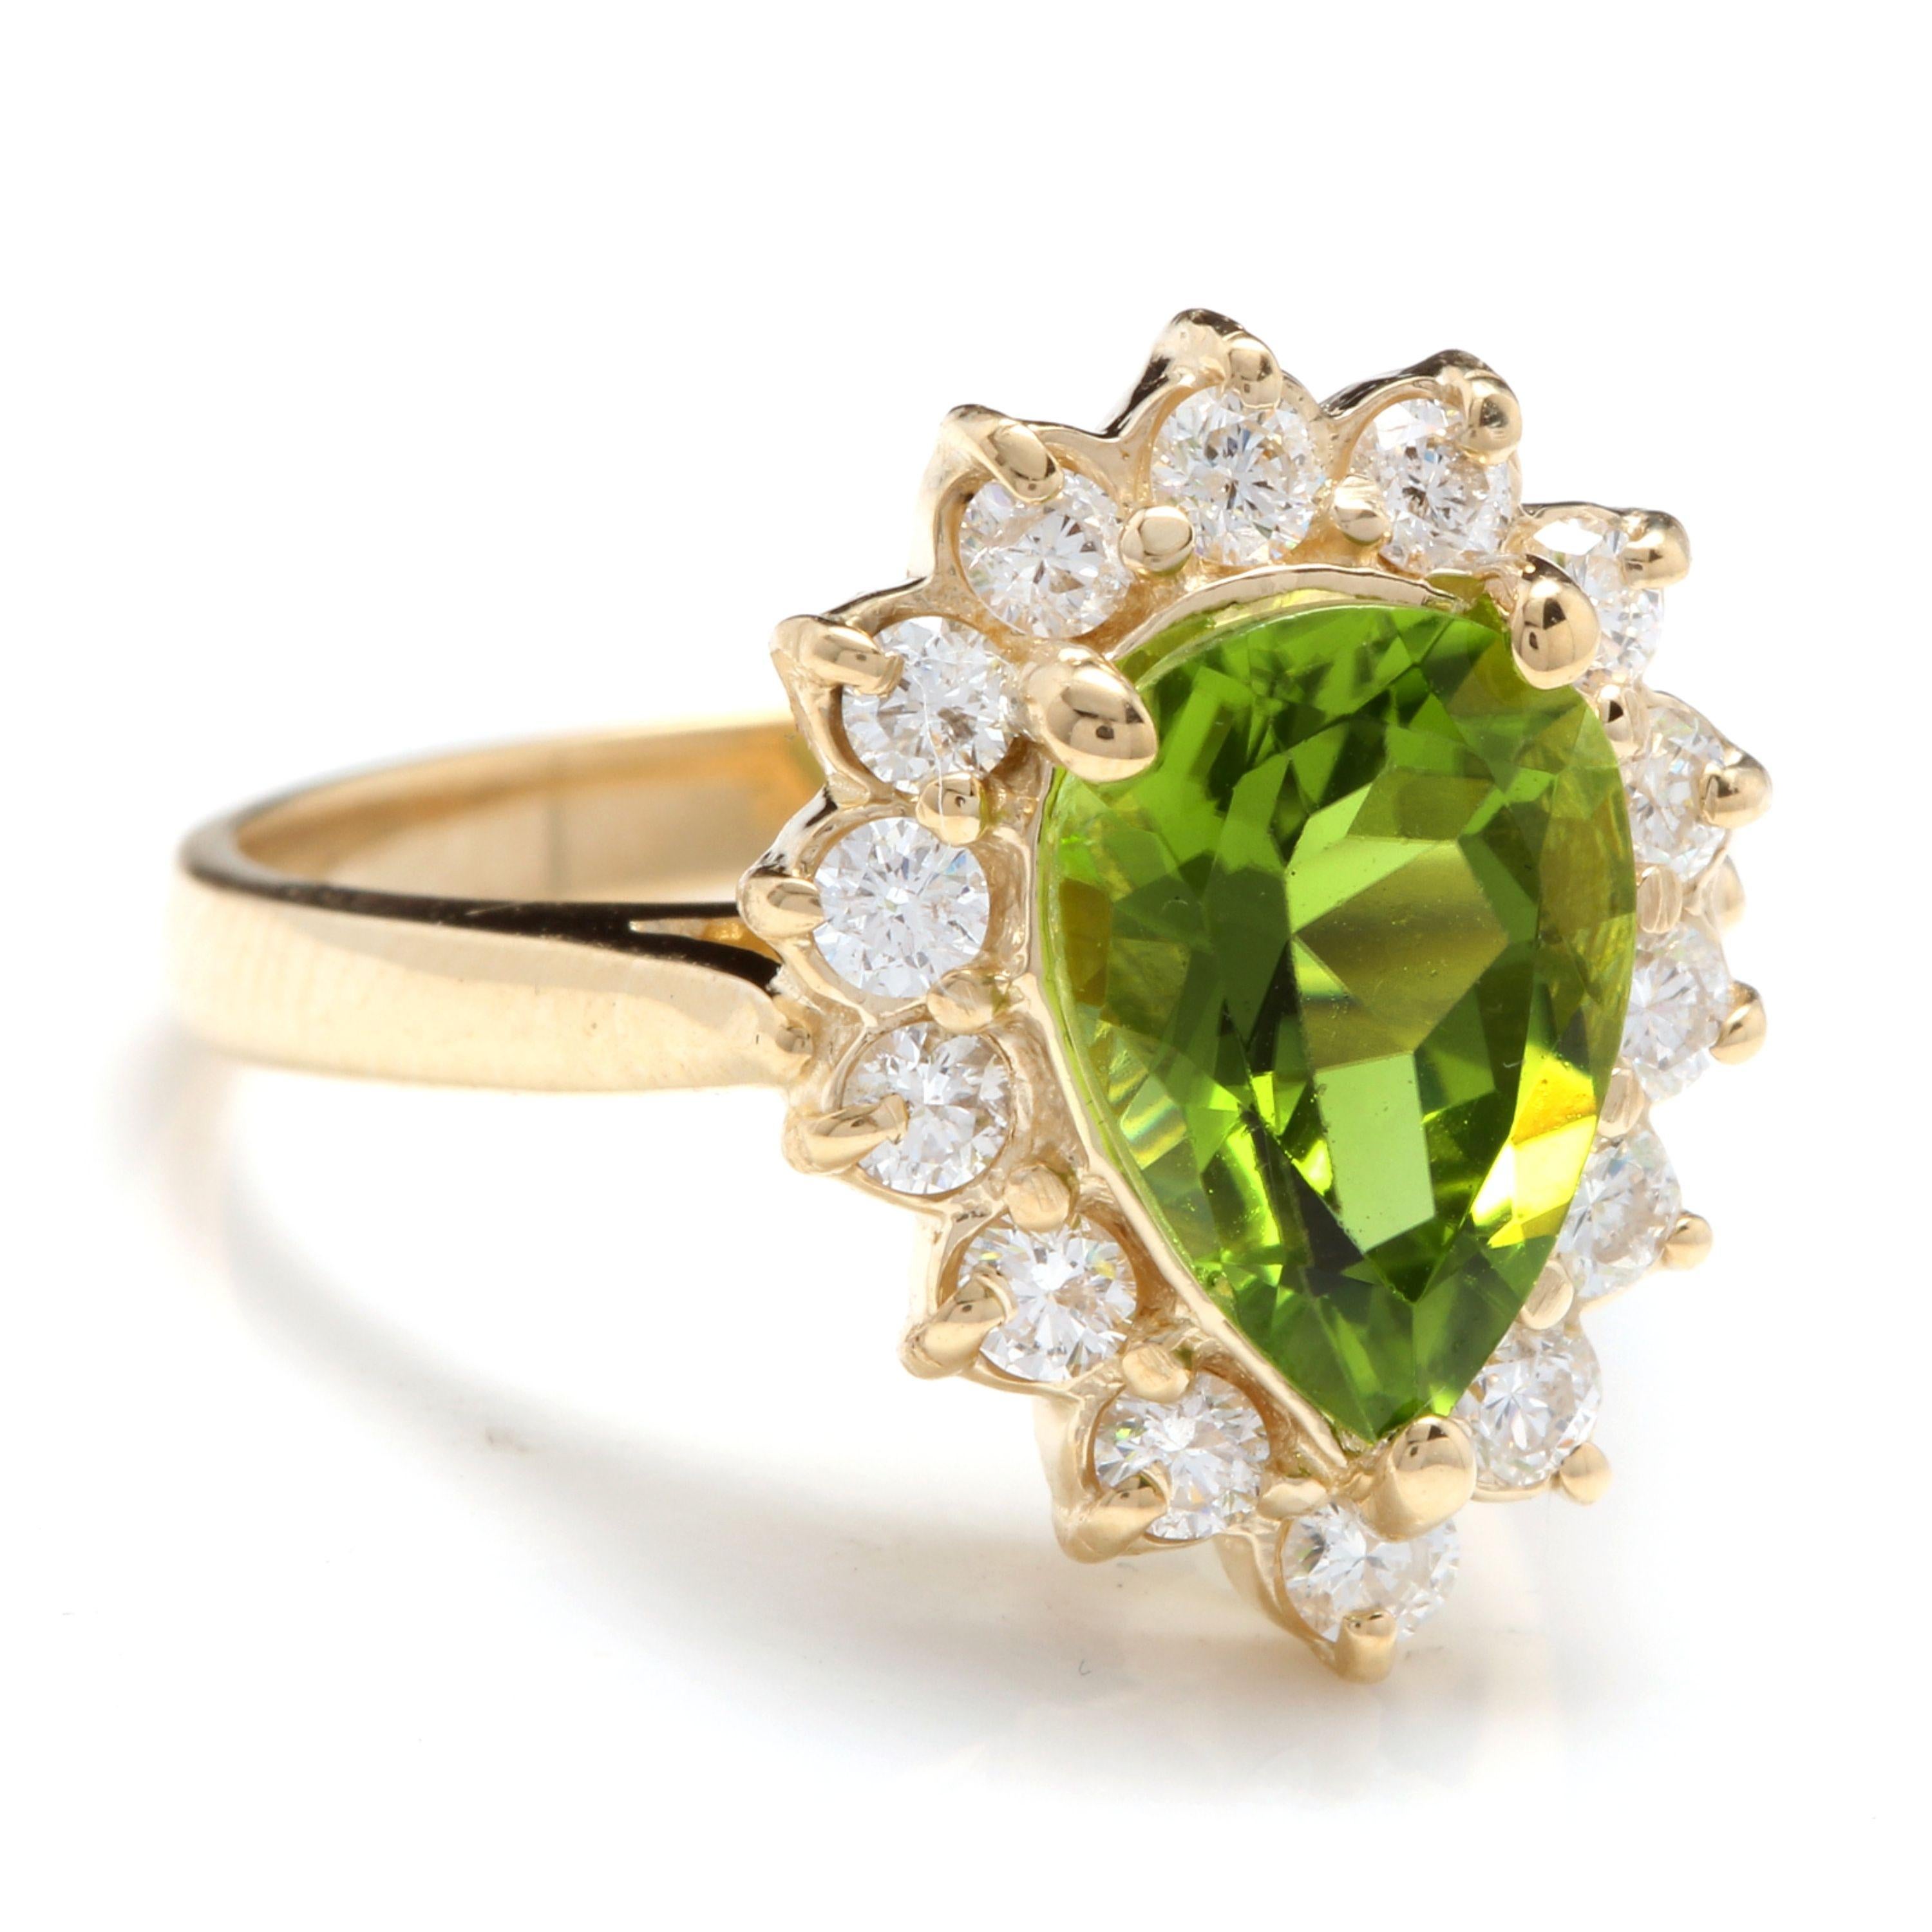 3.20 Carats Natural Very Nice Looking Peridot and Diamond 14K Solid Yellow Gold Ring

Total Natural Pear Shaped Peridot Weight is: Approx. 2.50 Carats

Peridot Measures: Approx. 11 x 7mm

Natural Round Diamonds Weight: Approx. 0.70 Carats (color G-H